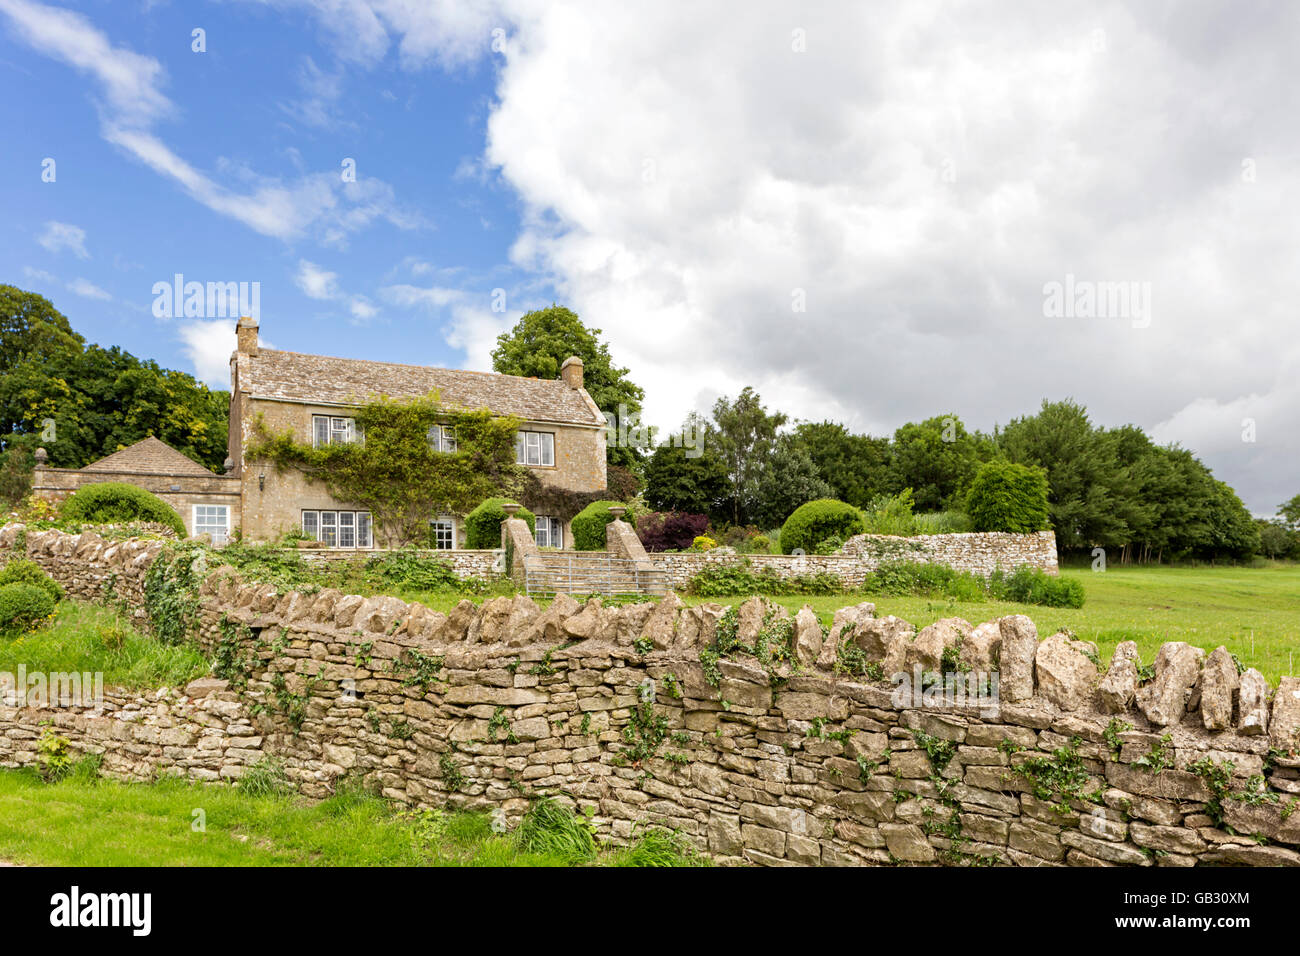 Attractive houses in the Cotswold village of Winstone, Gloucestershire, England, UK Stock Photo